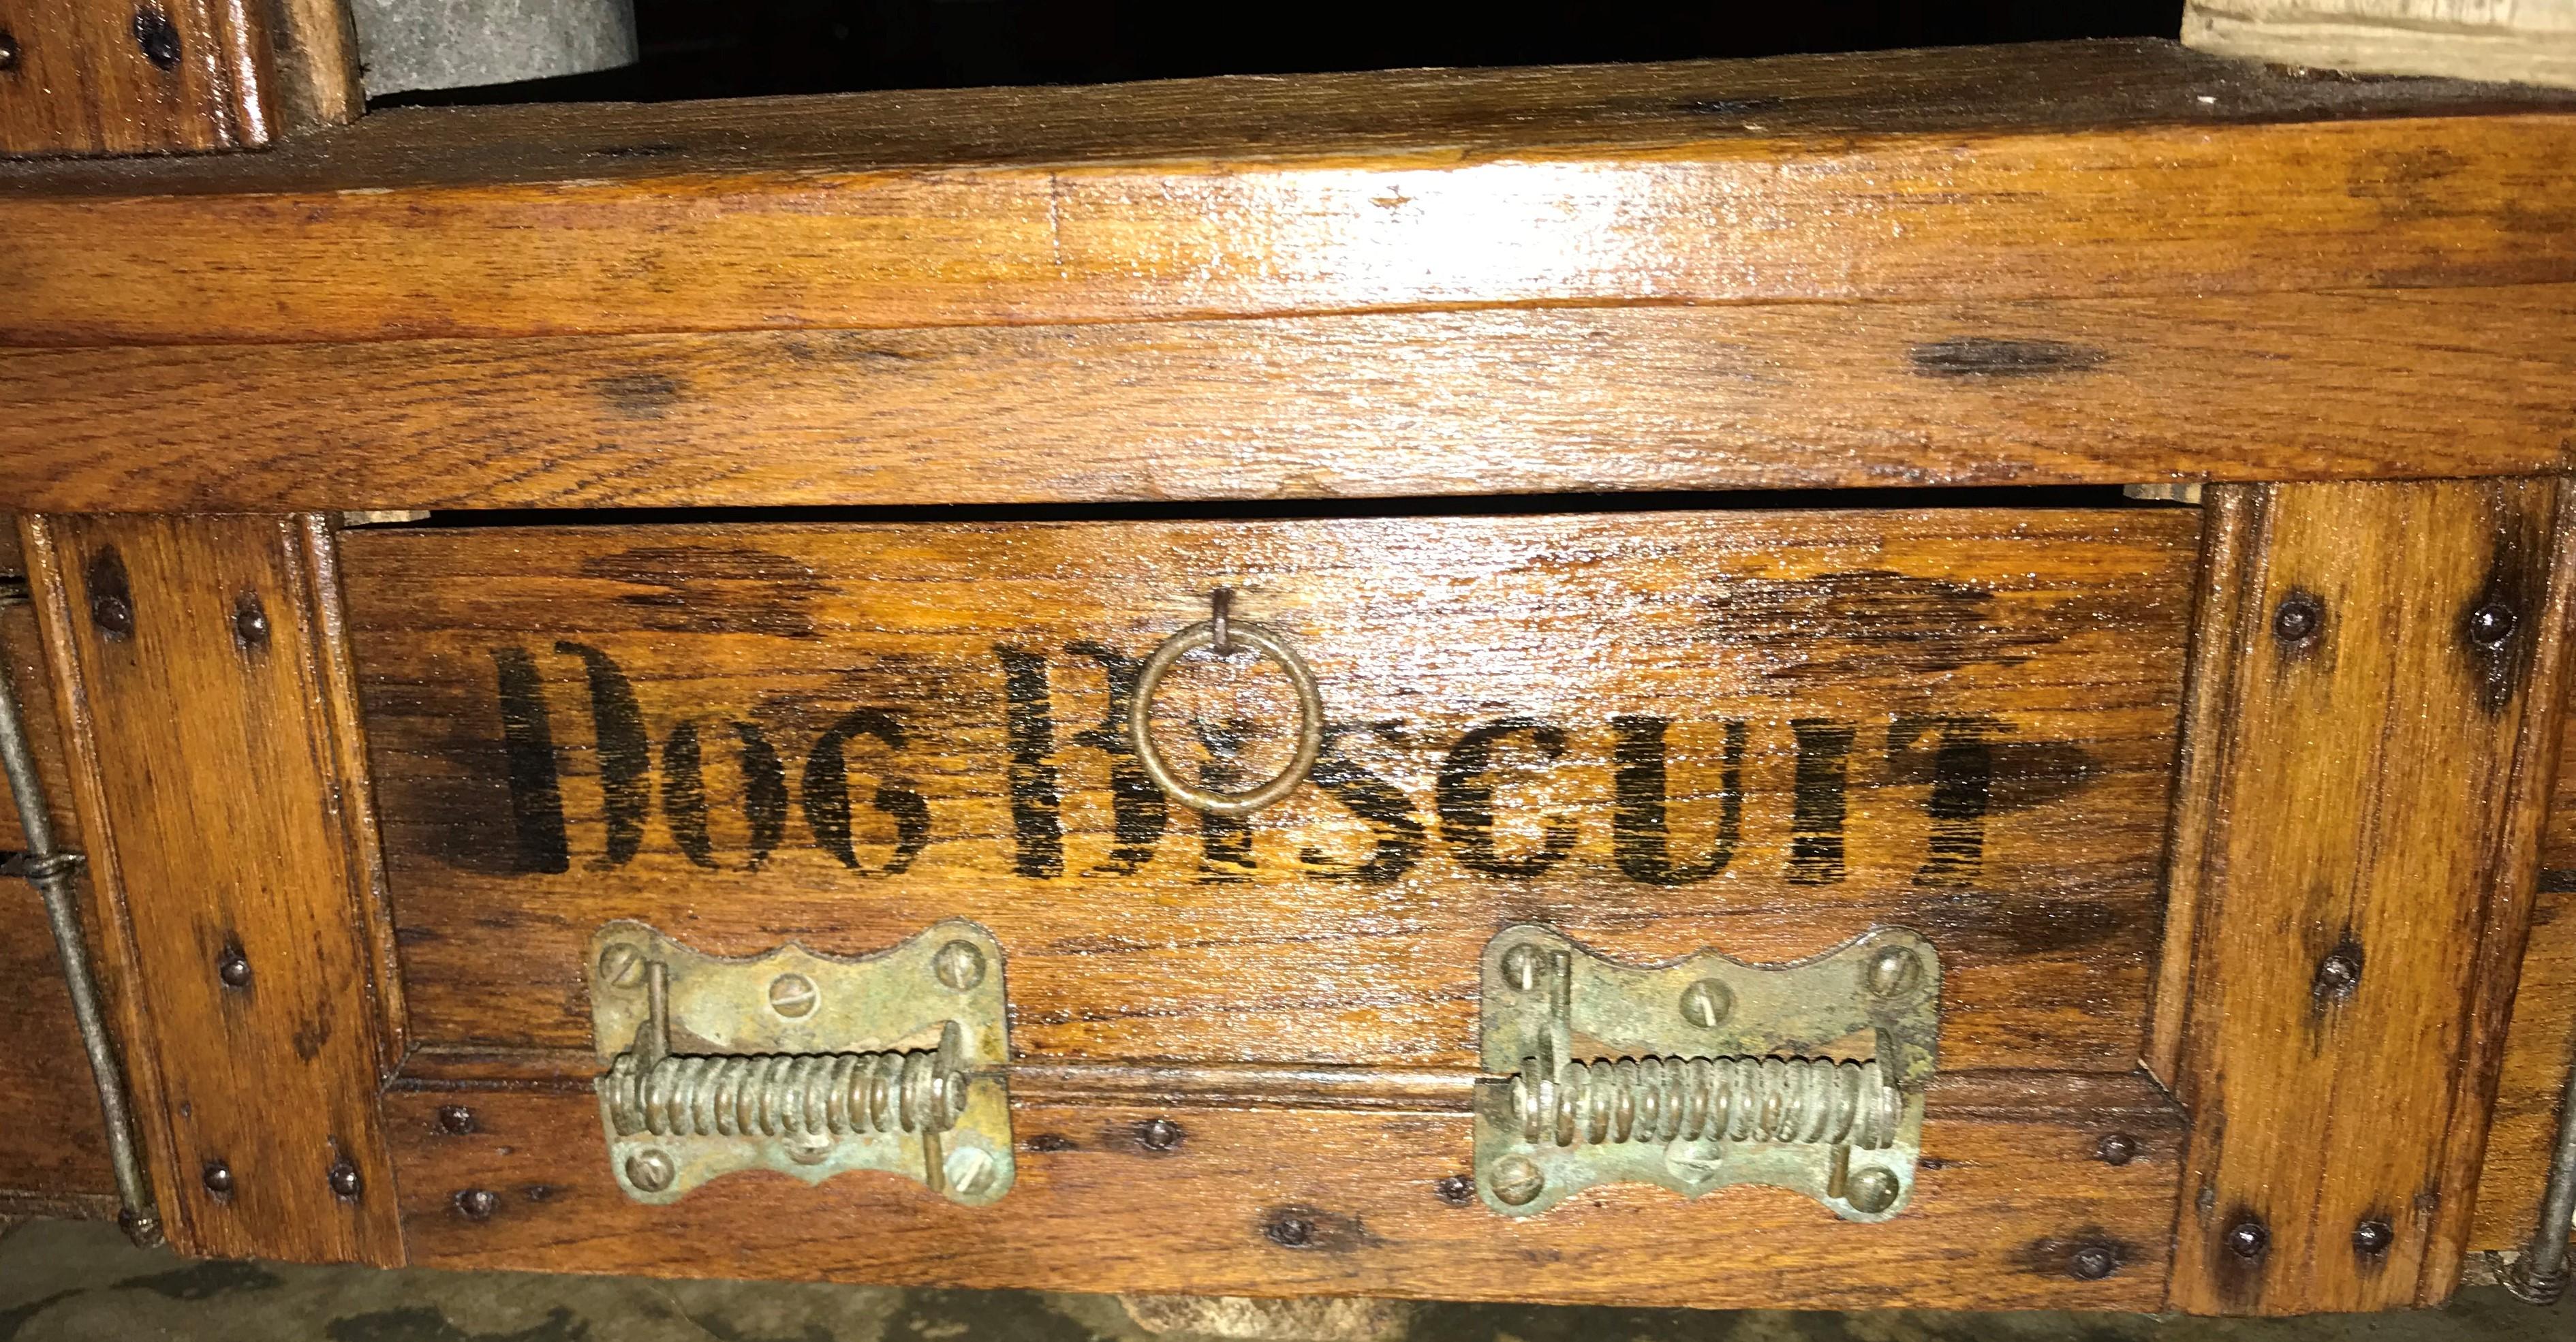 Metal Antique Wooden Dog Carrier by Absalom Backus, Jr & Sons with Label circa 1902